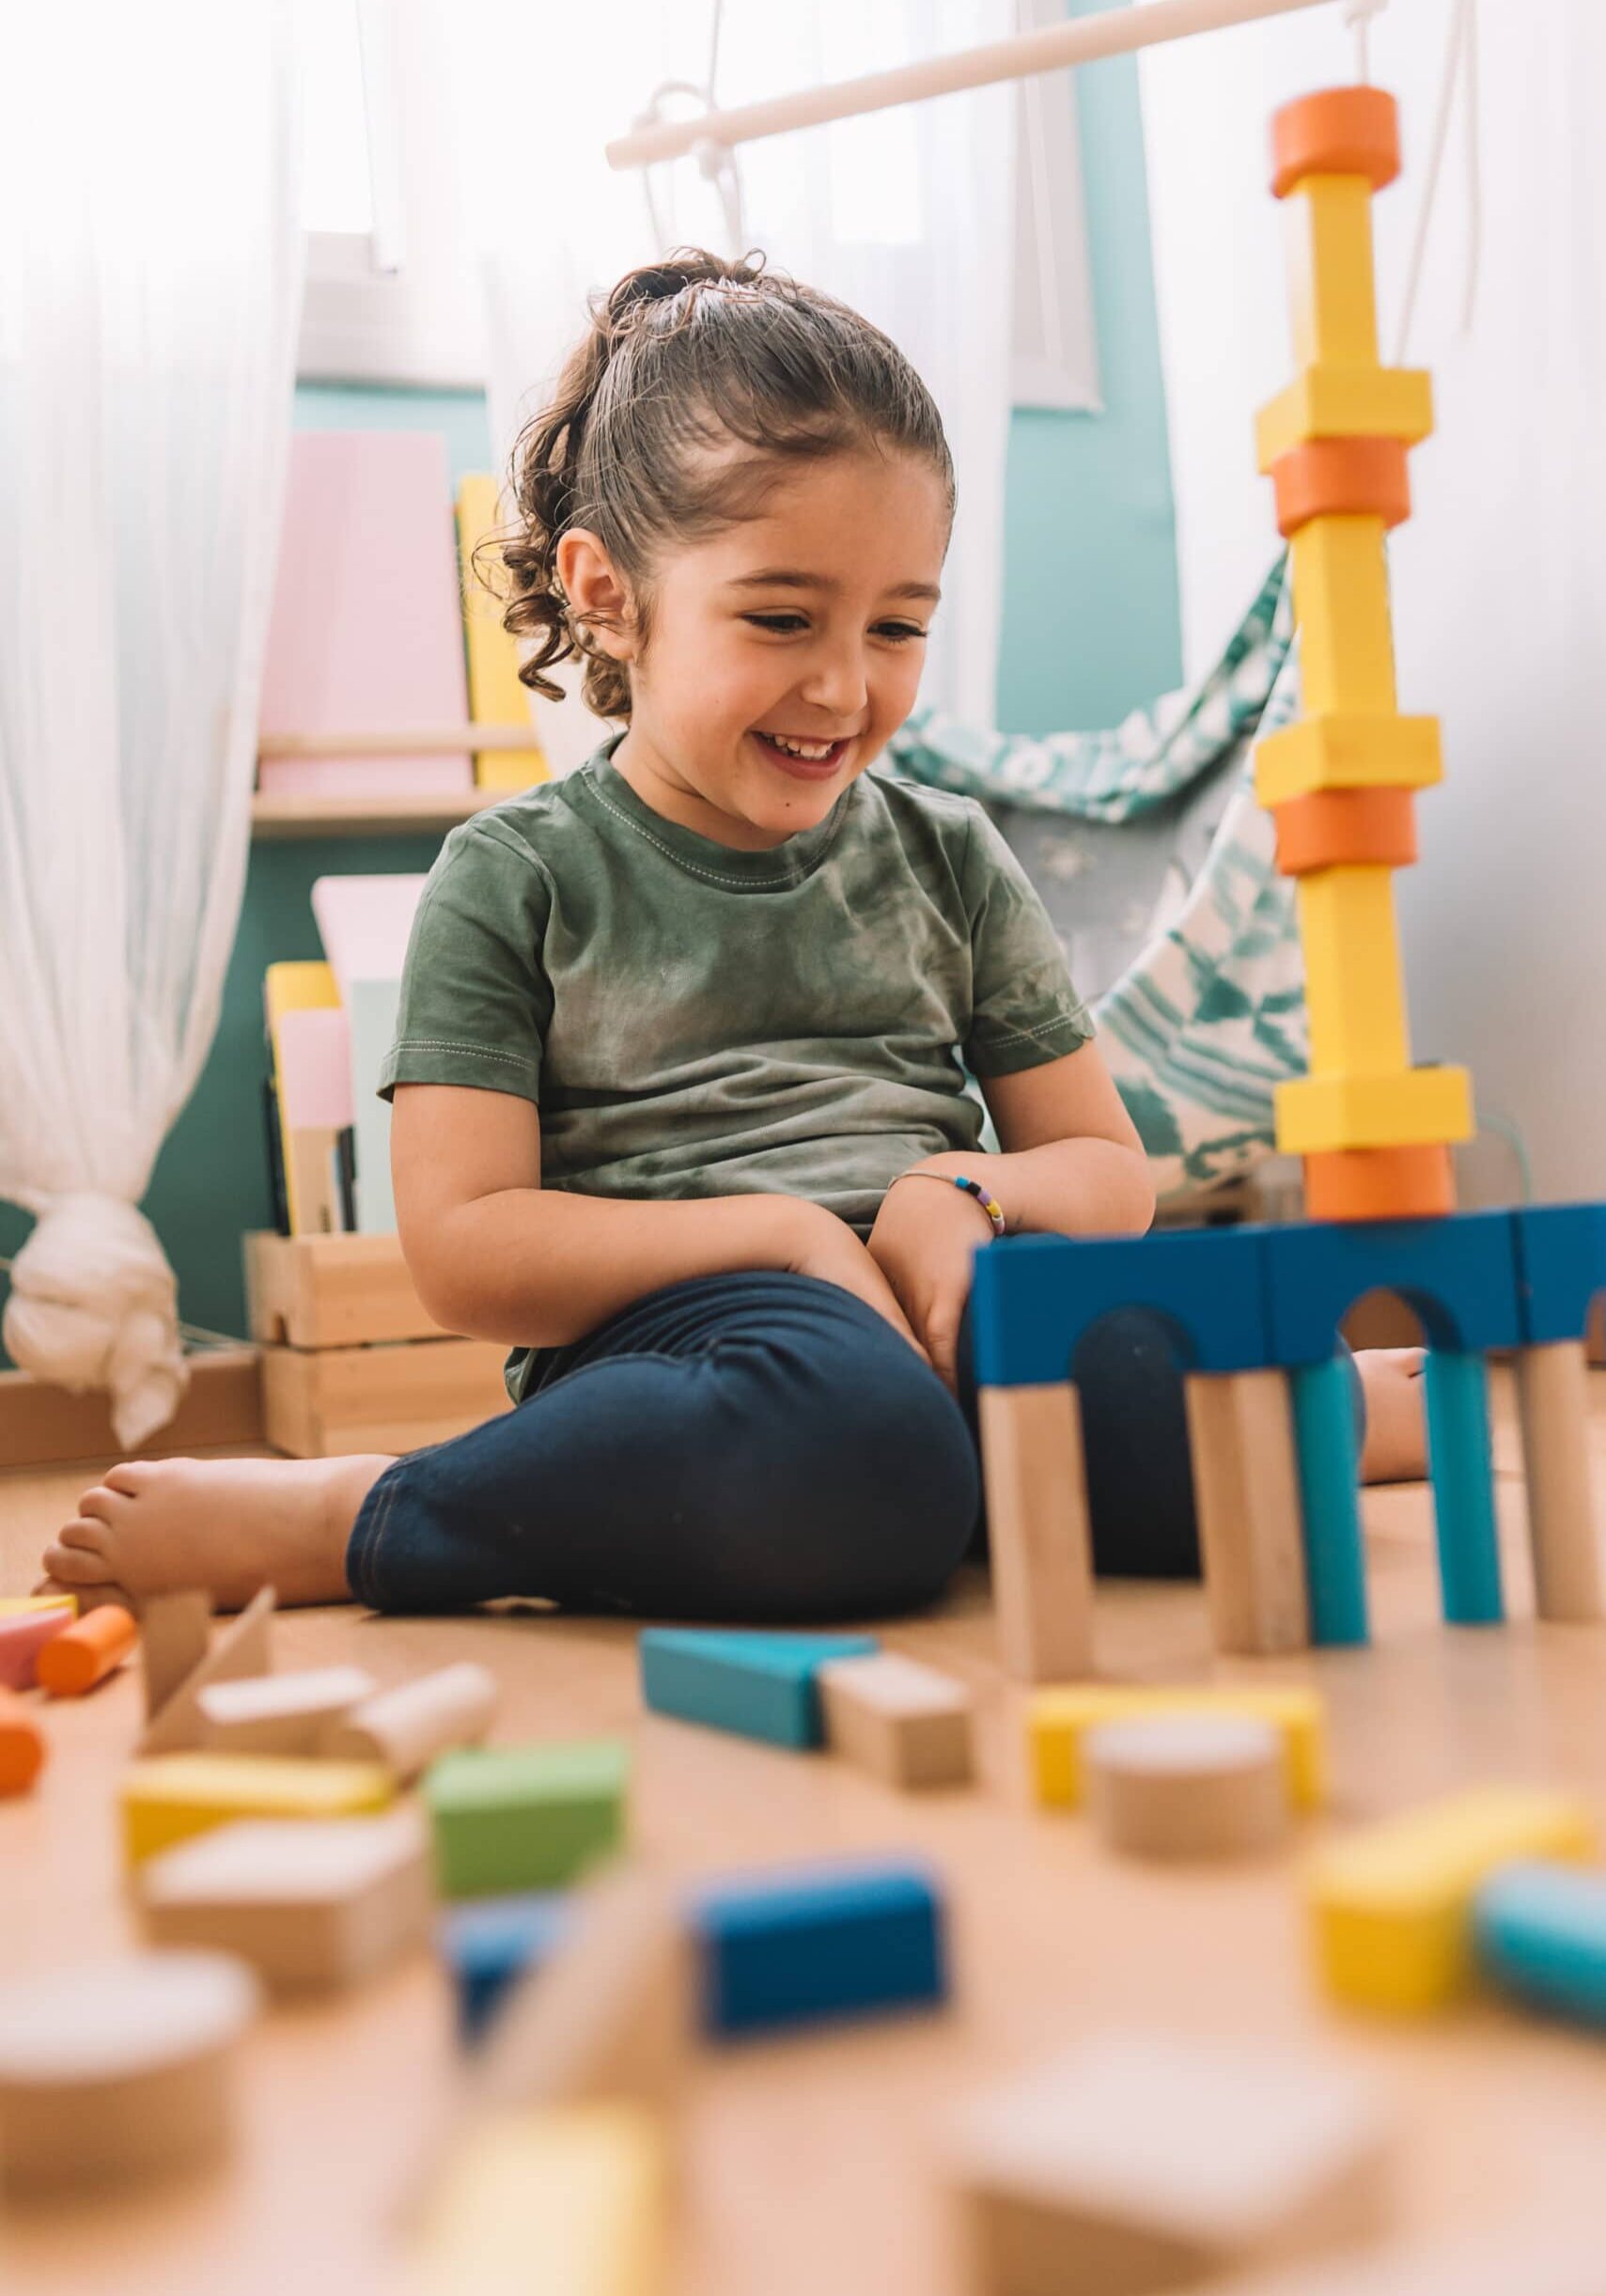 Happy Girl Building With Colorful Wooden Blocks